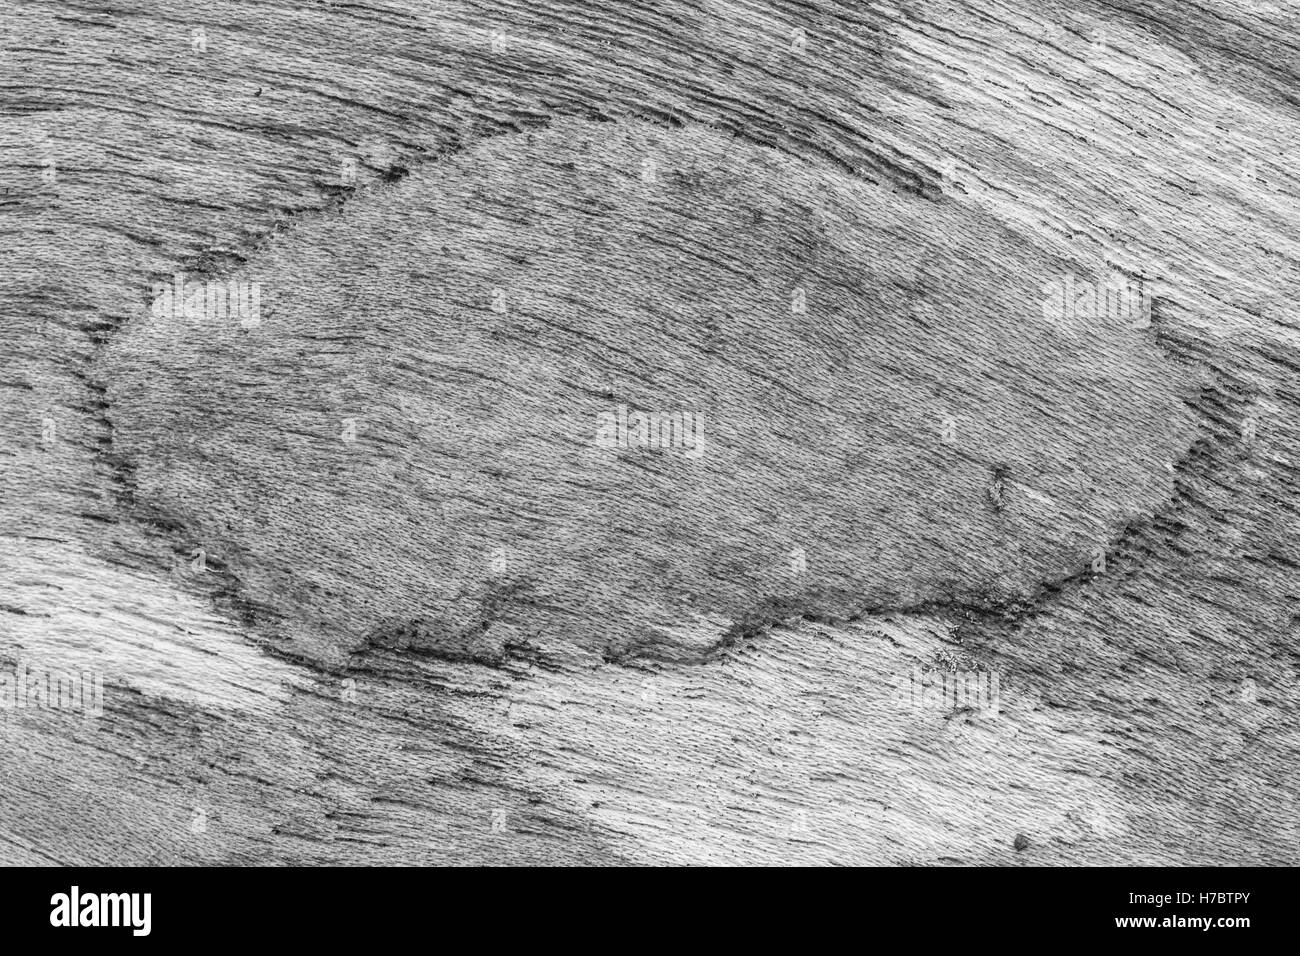 texture of bark wood use as natural background, black and white tone Stock Photo